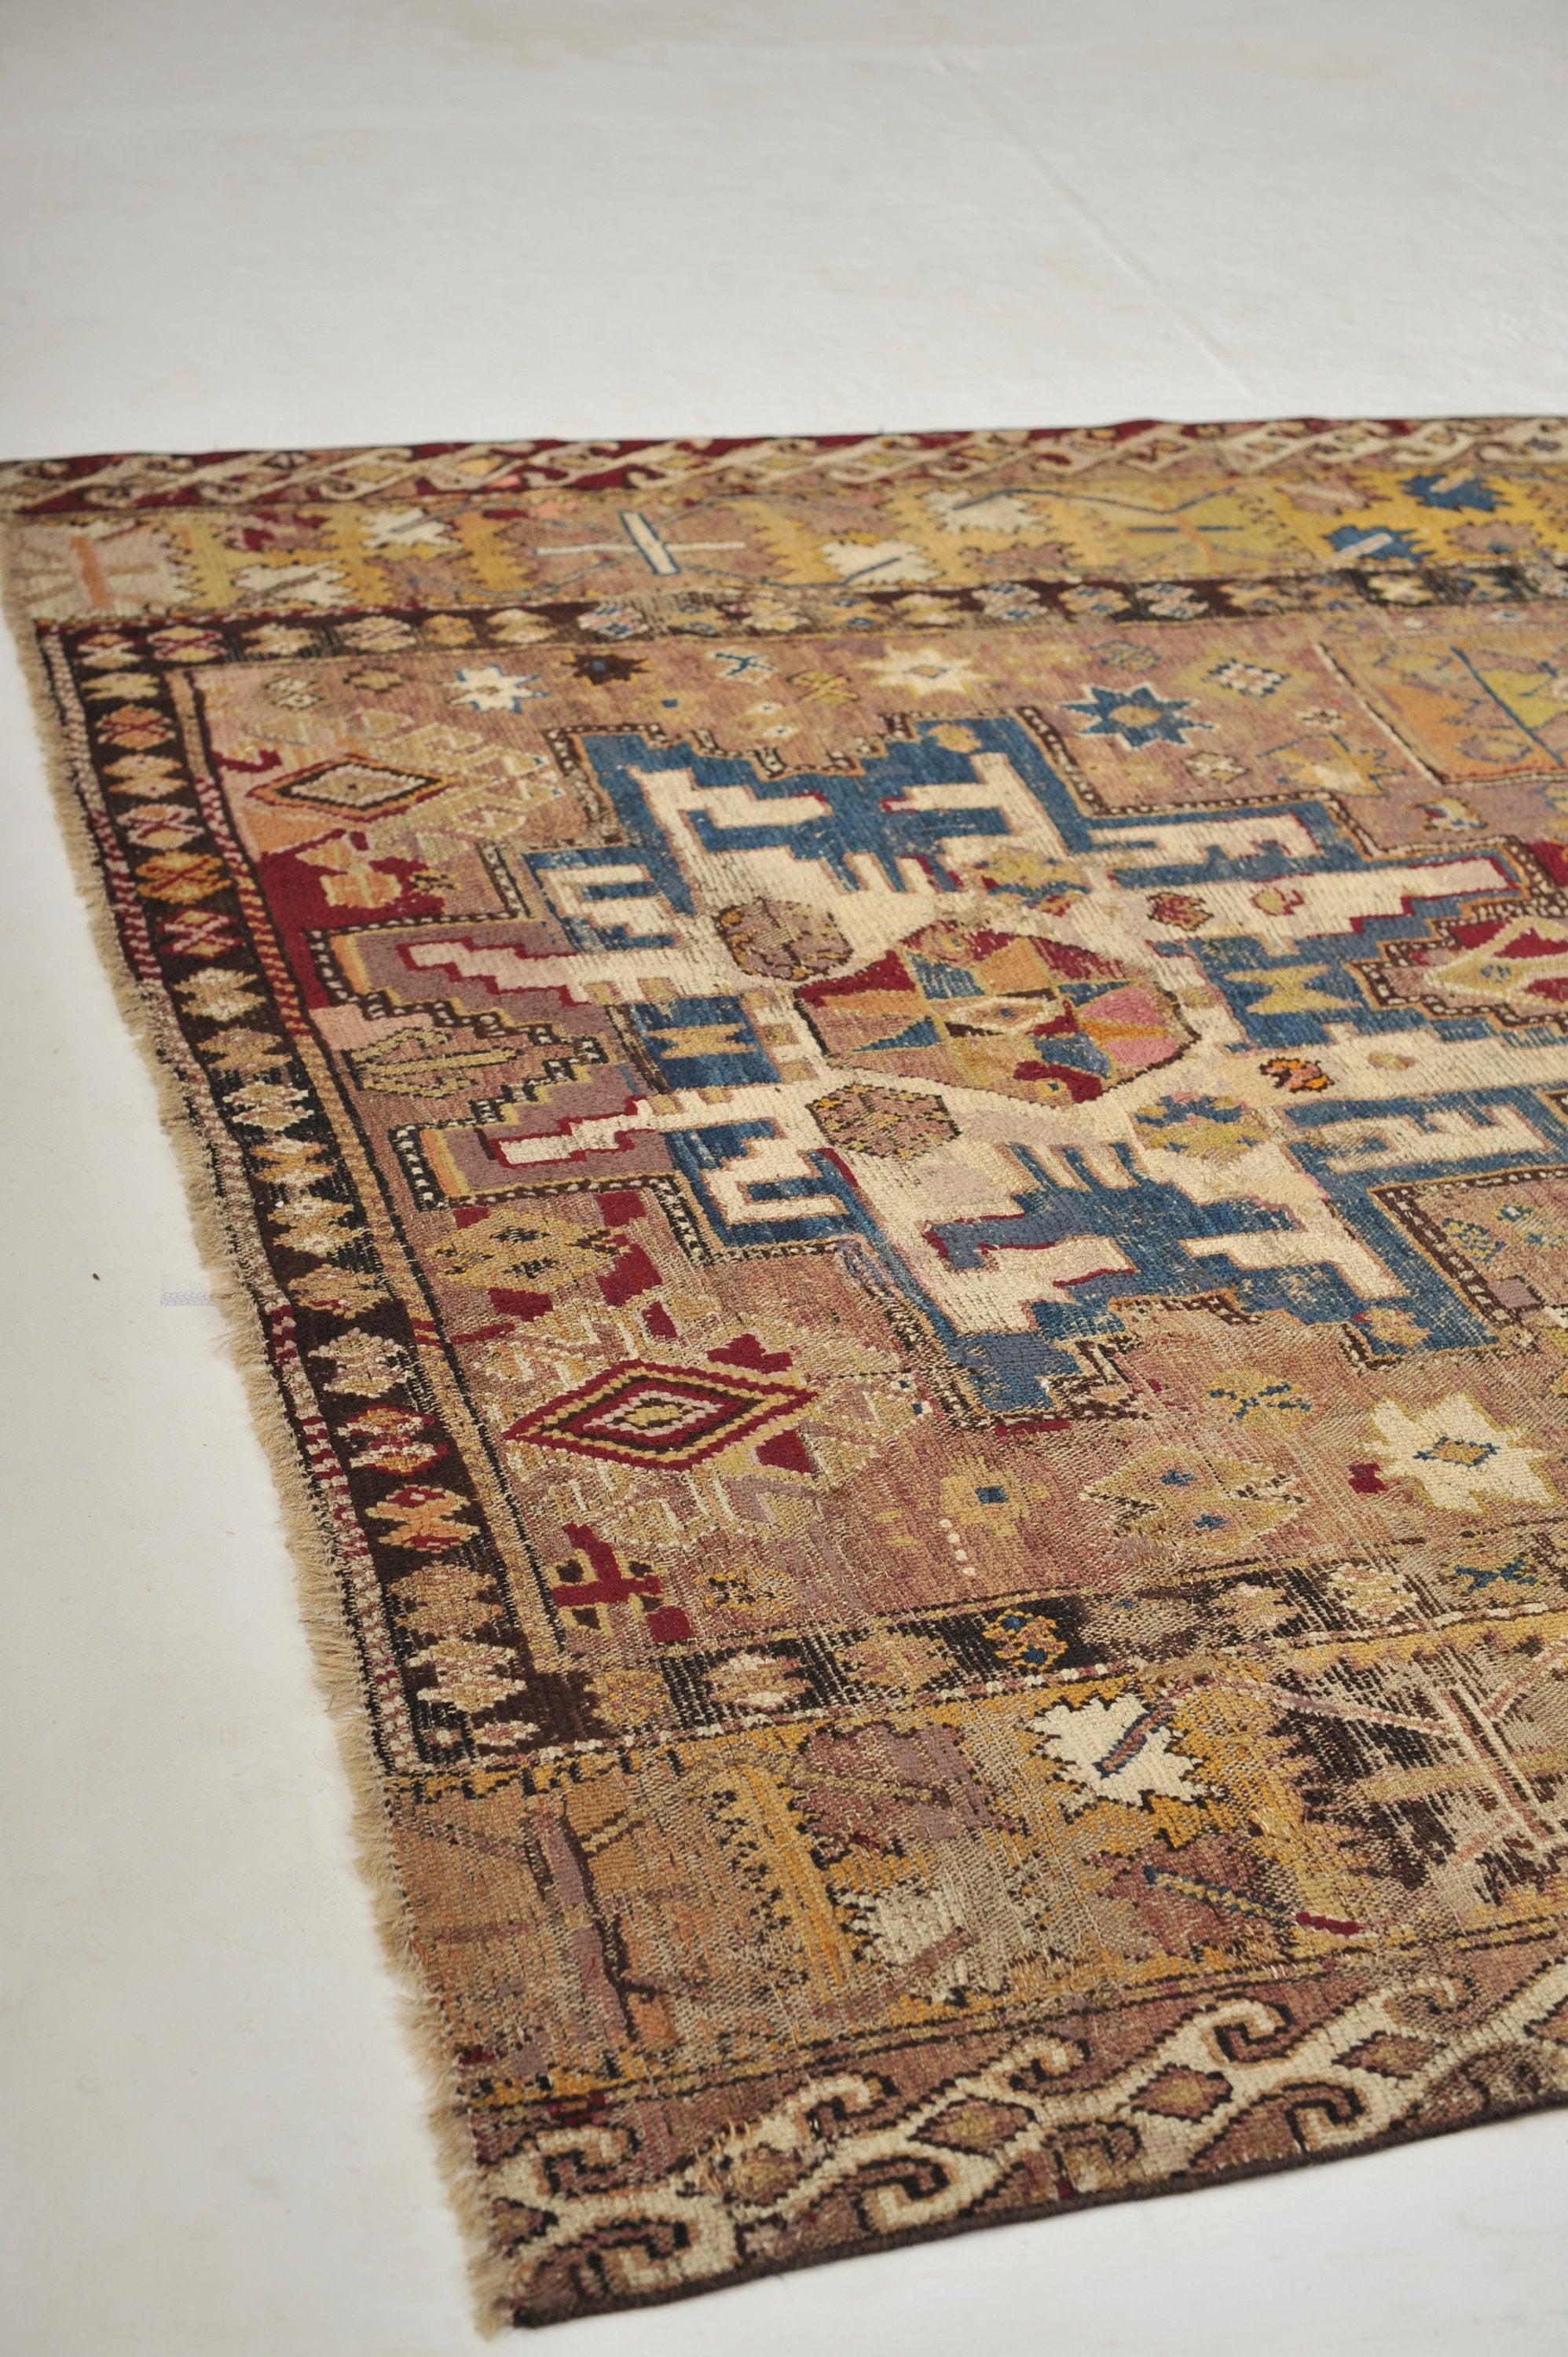 Antique Textile Rug with Lavender, Sunflower Yellows, & Blues, c. 1900 For Sale 3